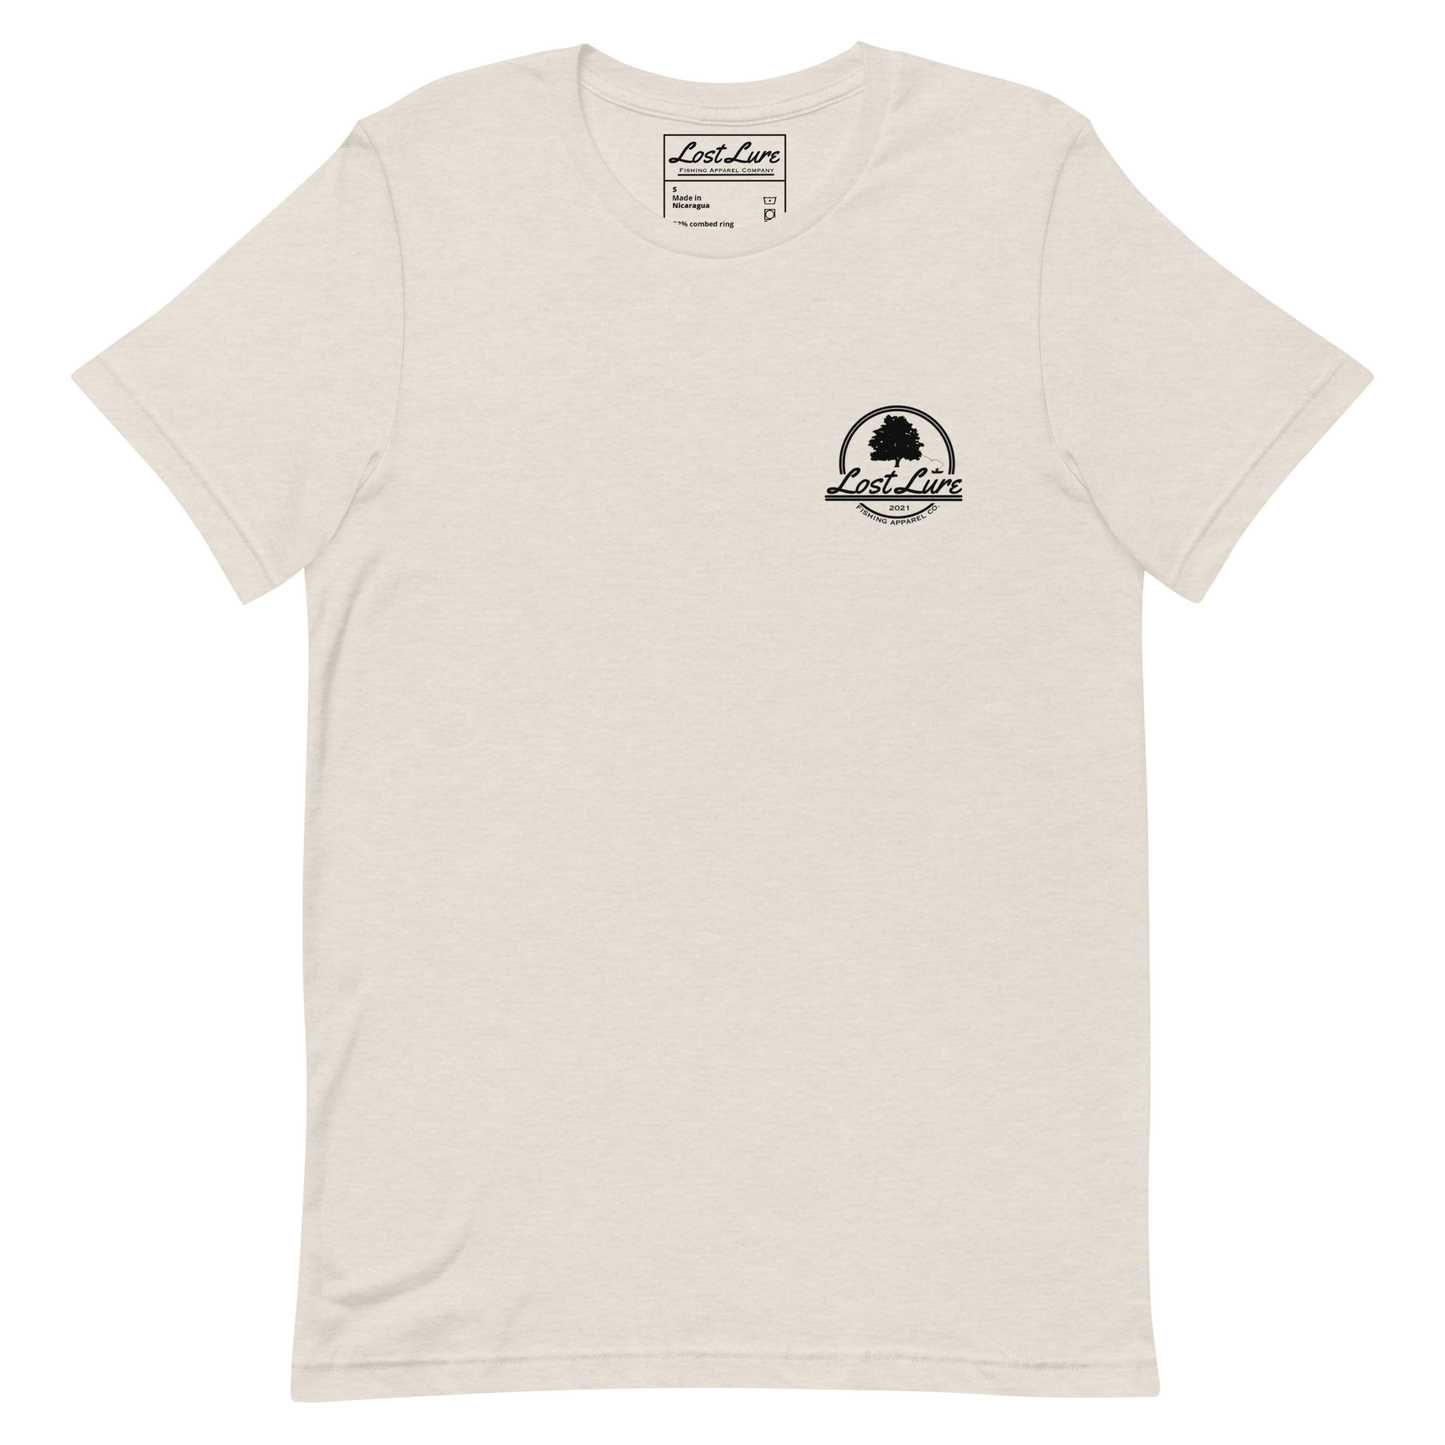 Bass fishing shirt. It has a drawing of a fat bass and it reads “lost lure co, catch fat fish”. The bass design is on the back, the lost lure logo is on the front. Crème colored shirt, front side 